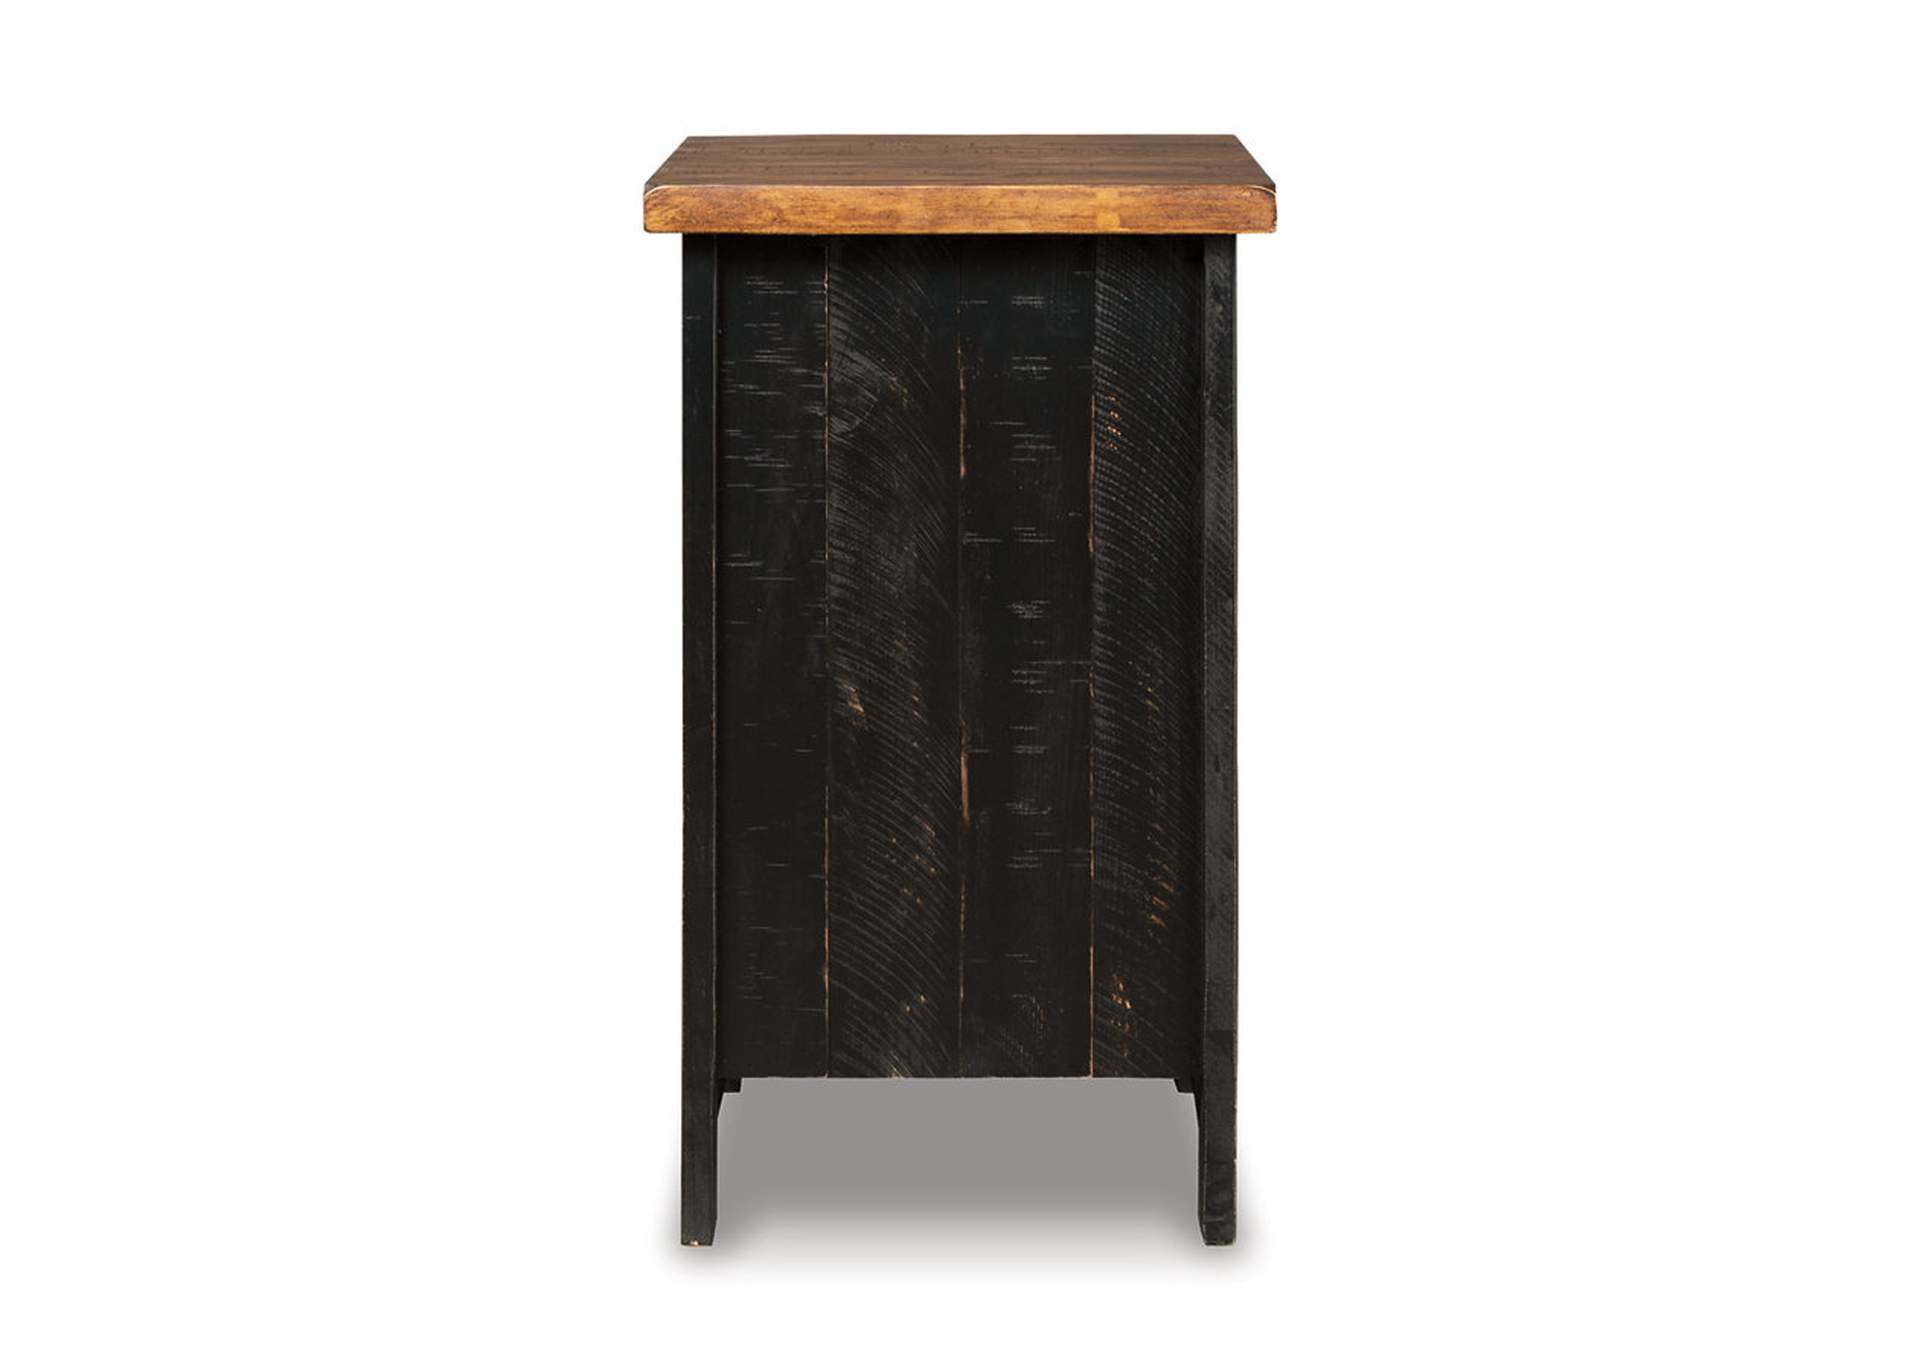 Valebeck Black Chairside End Table,Direct To Consumer Express